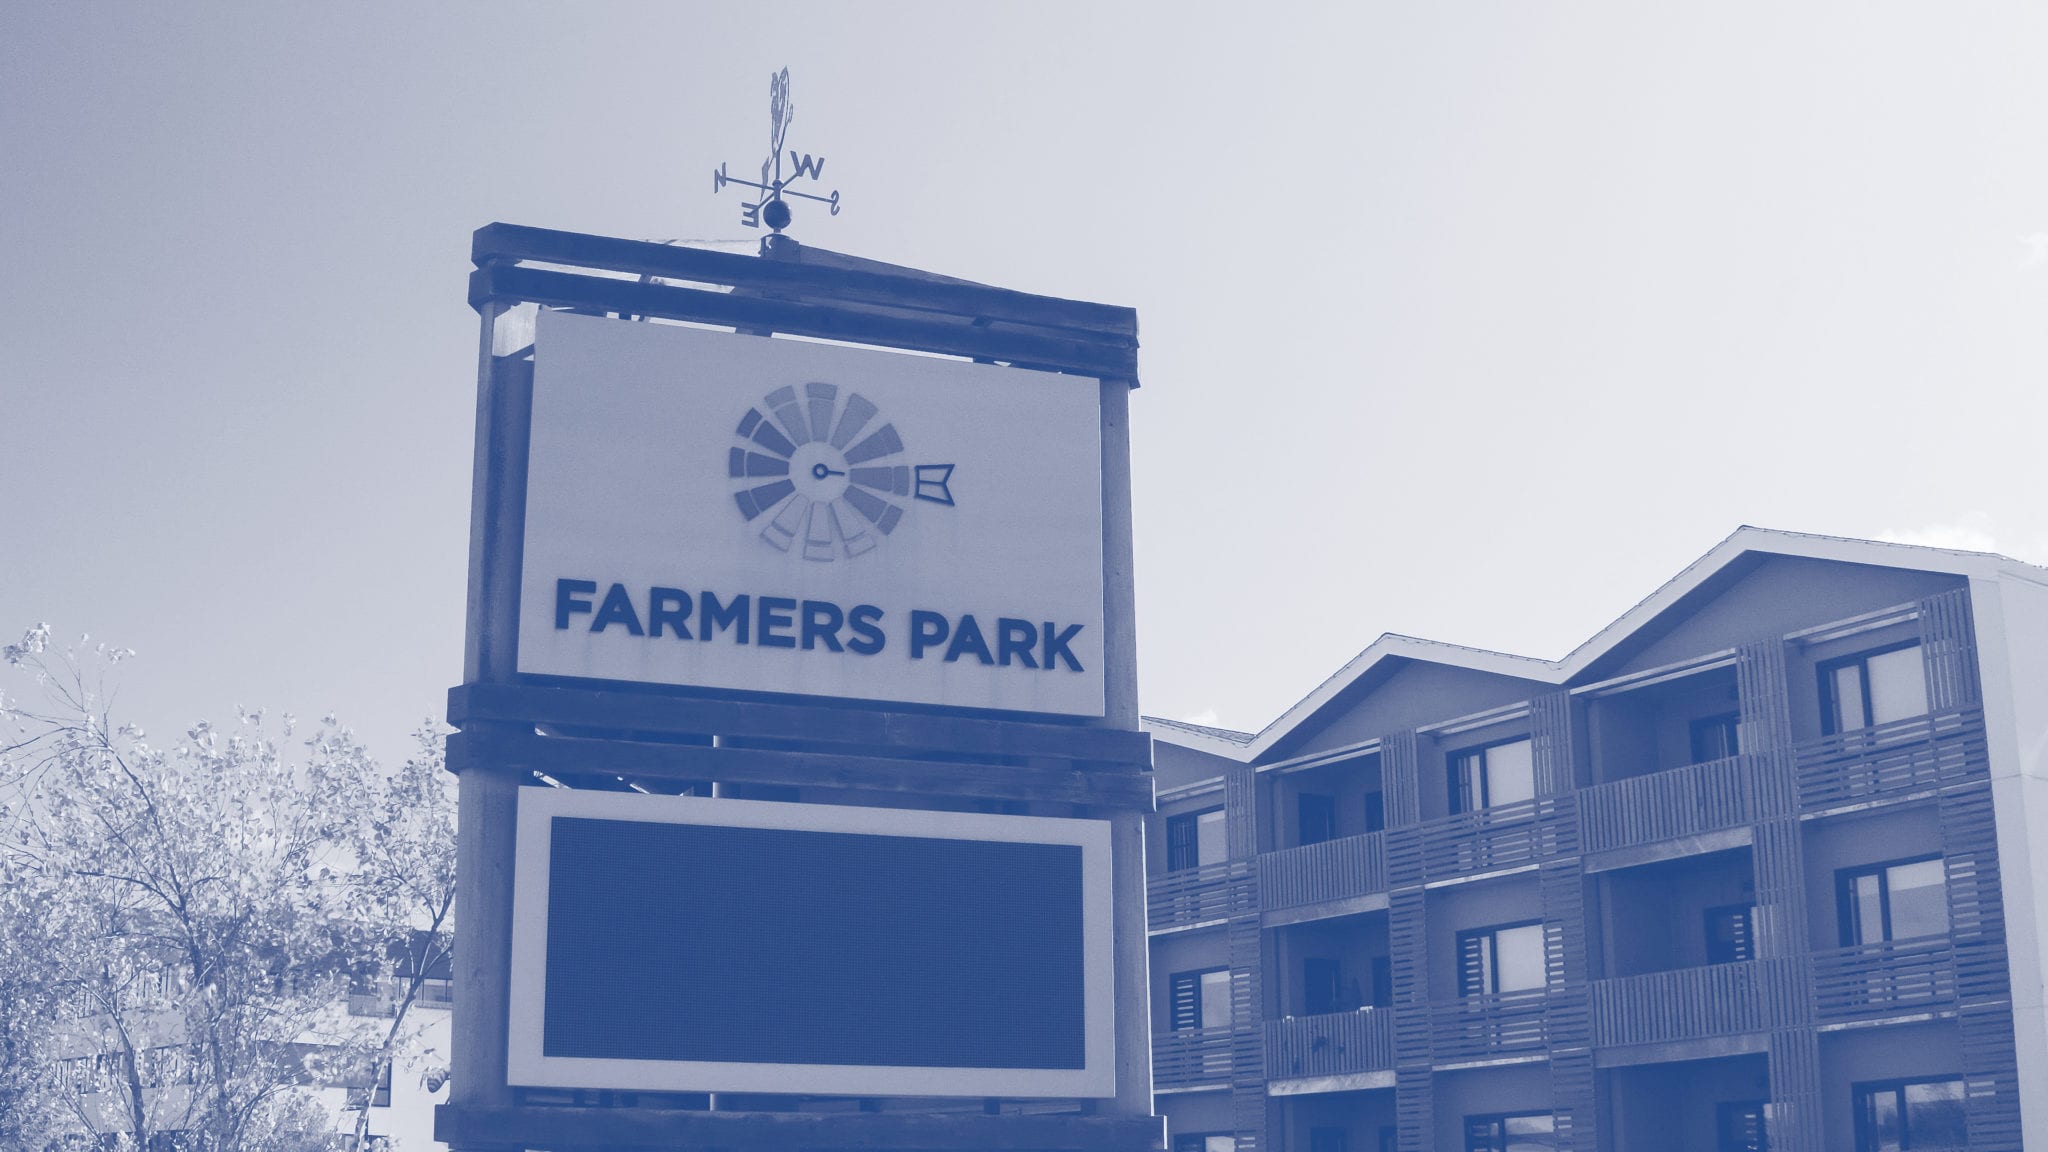 Farmers park sign with blue duotone